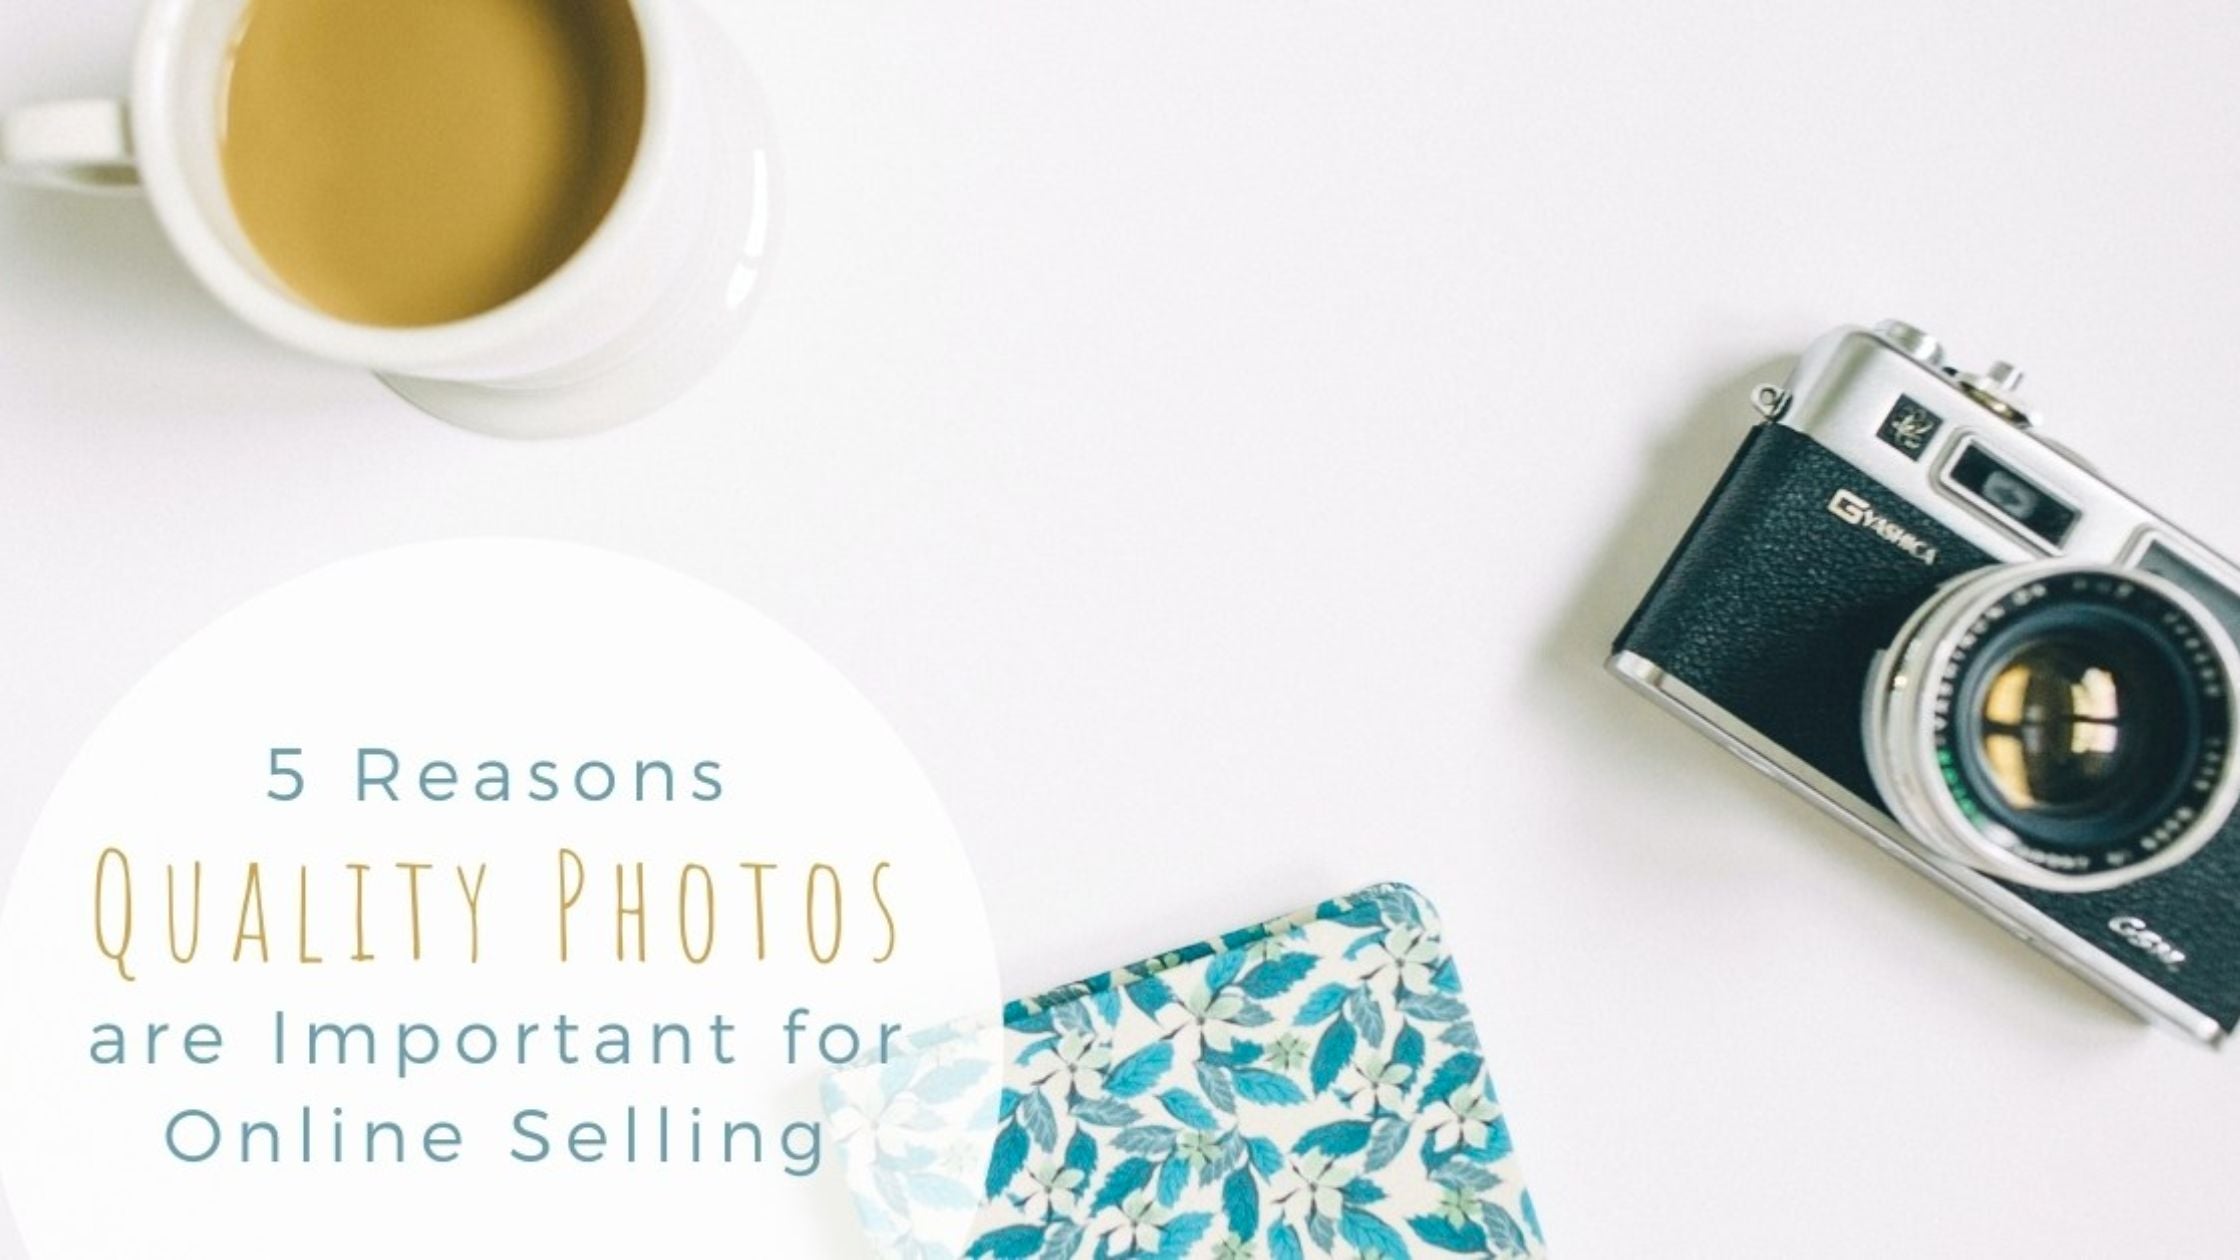 5 Reasons Quality Photos are Important for Online Selling